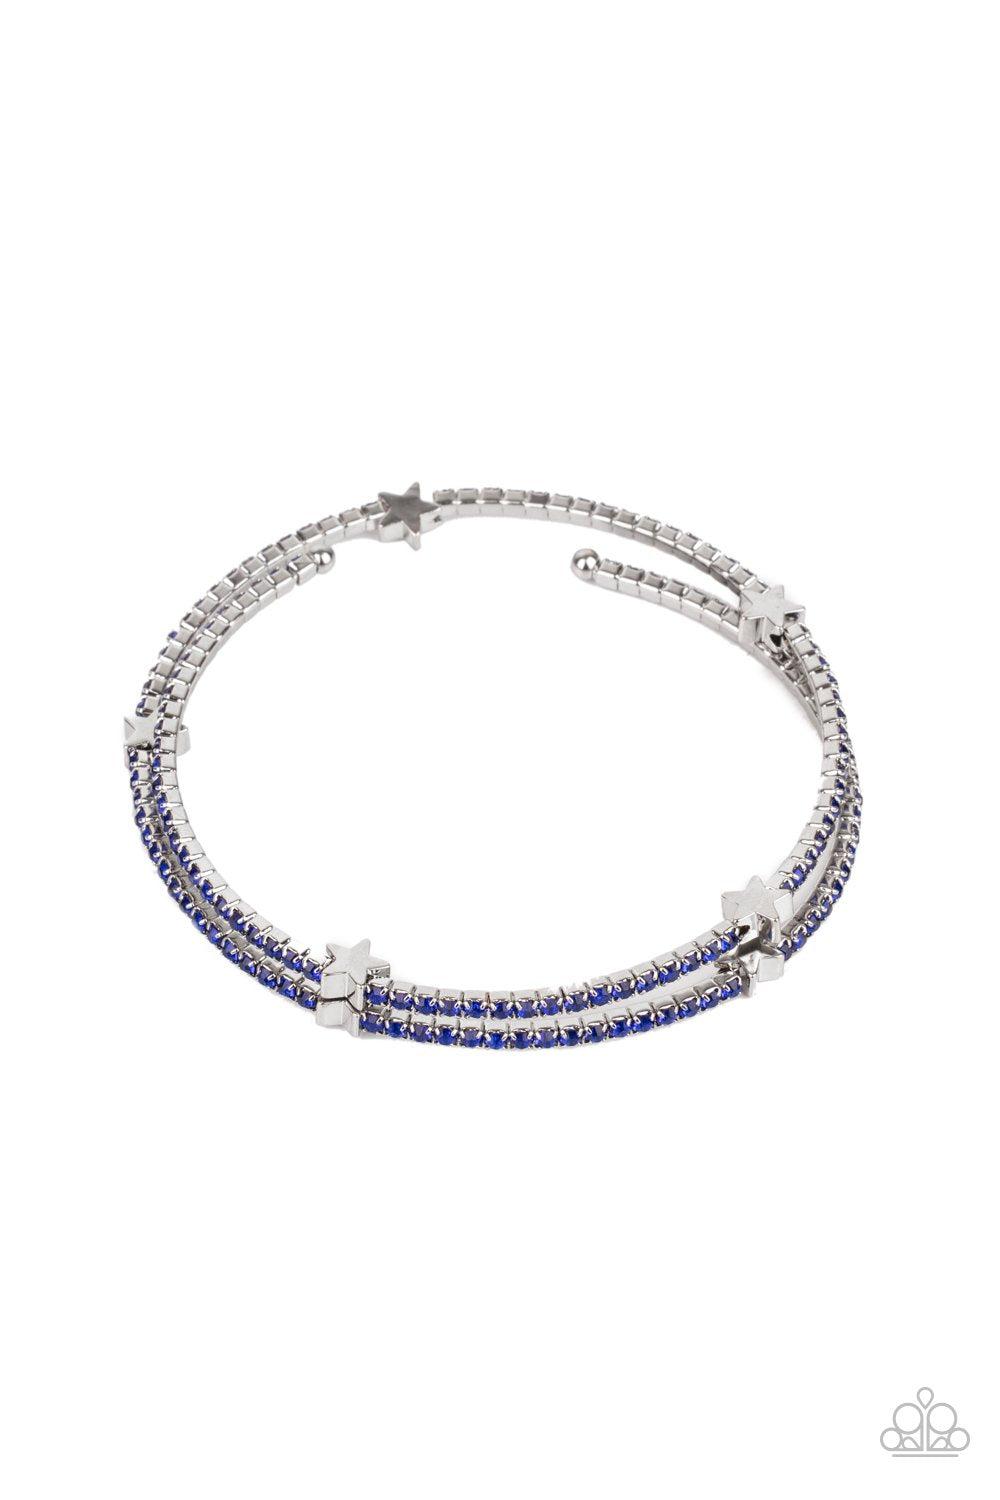 Let Freedom BLING Blue Rhinestone and Silver Star Infinity Wrap Bracelet - Paparazzi Accessories- lightbox - CarasShop.com - $5 Jewelry by Cara Jewels